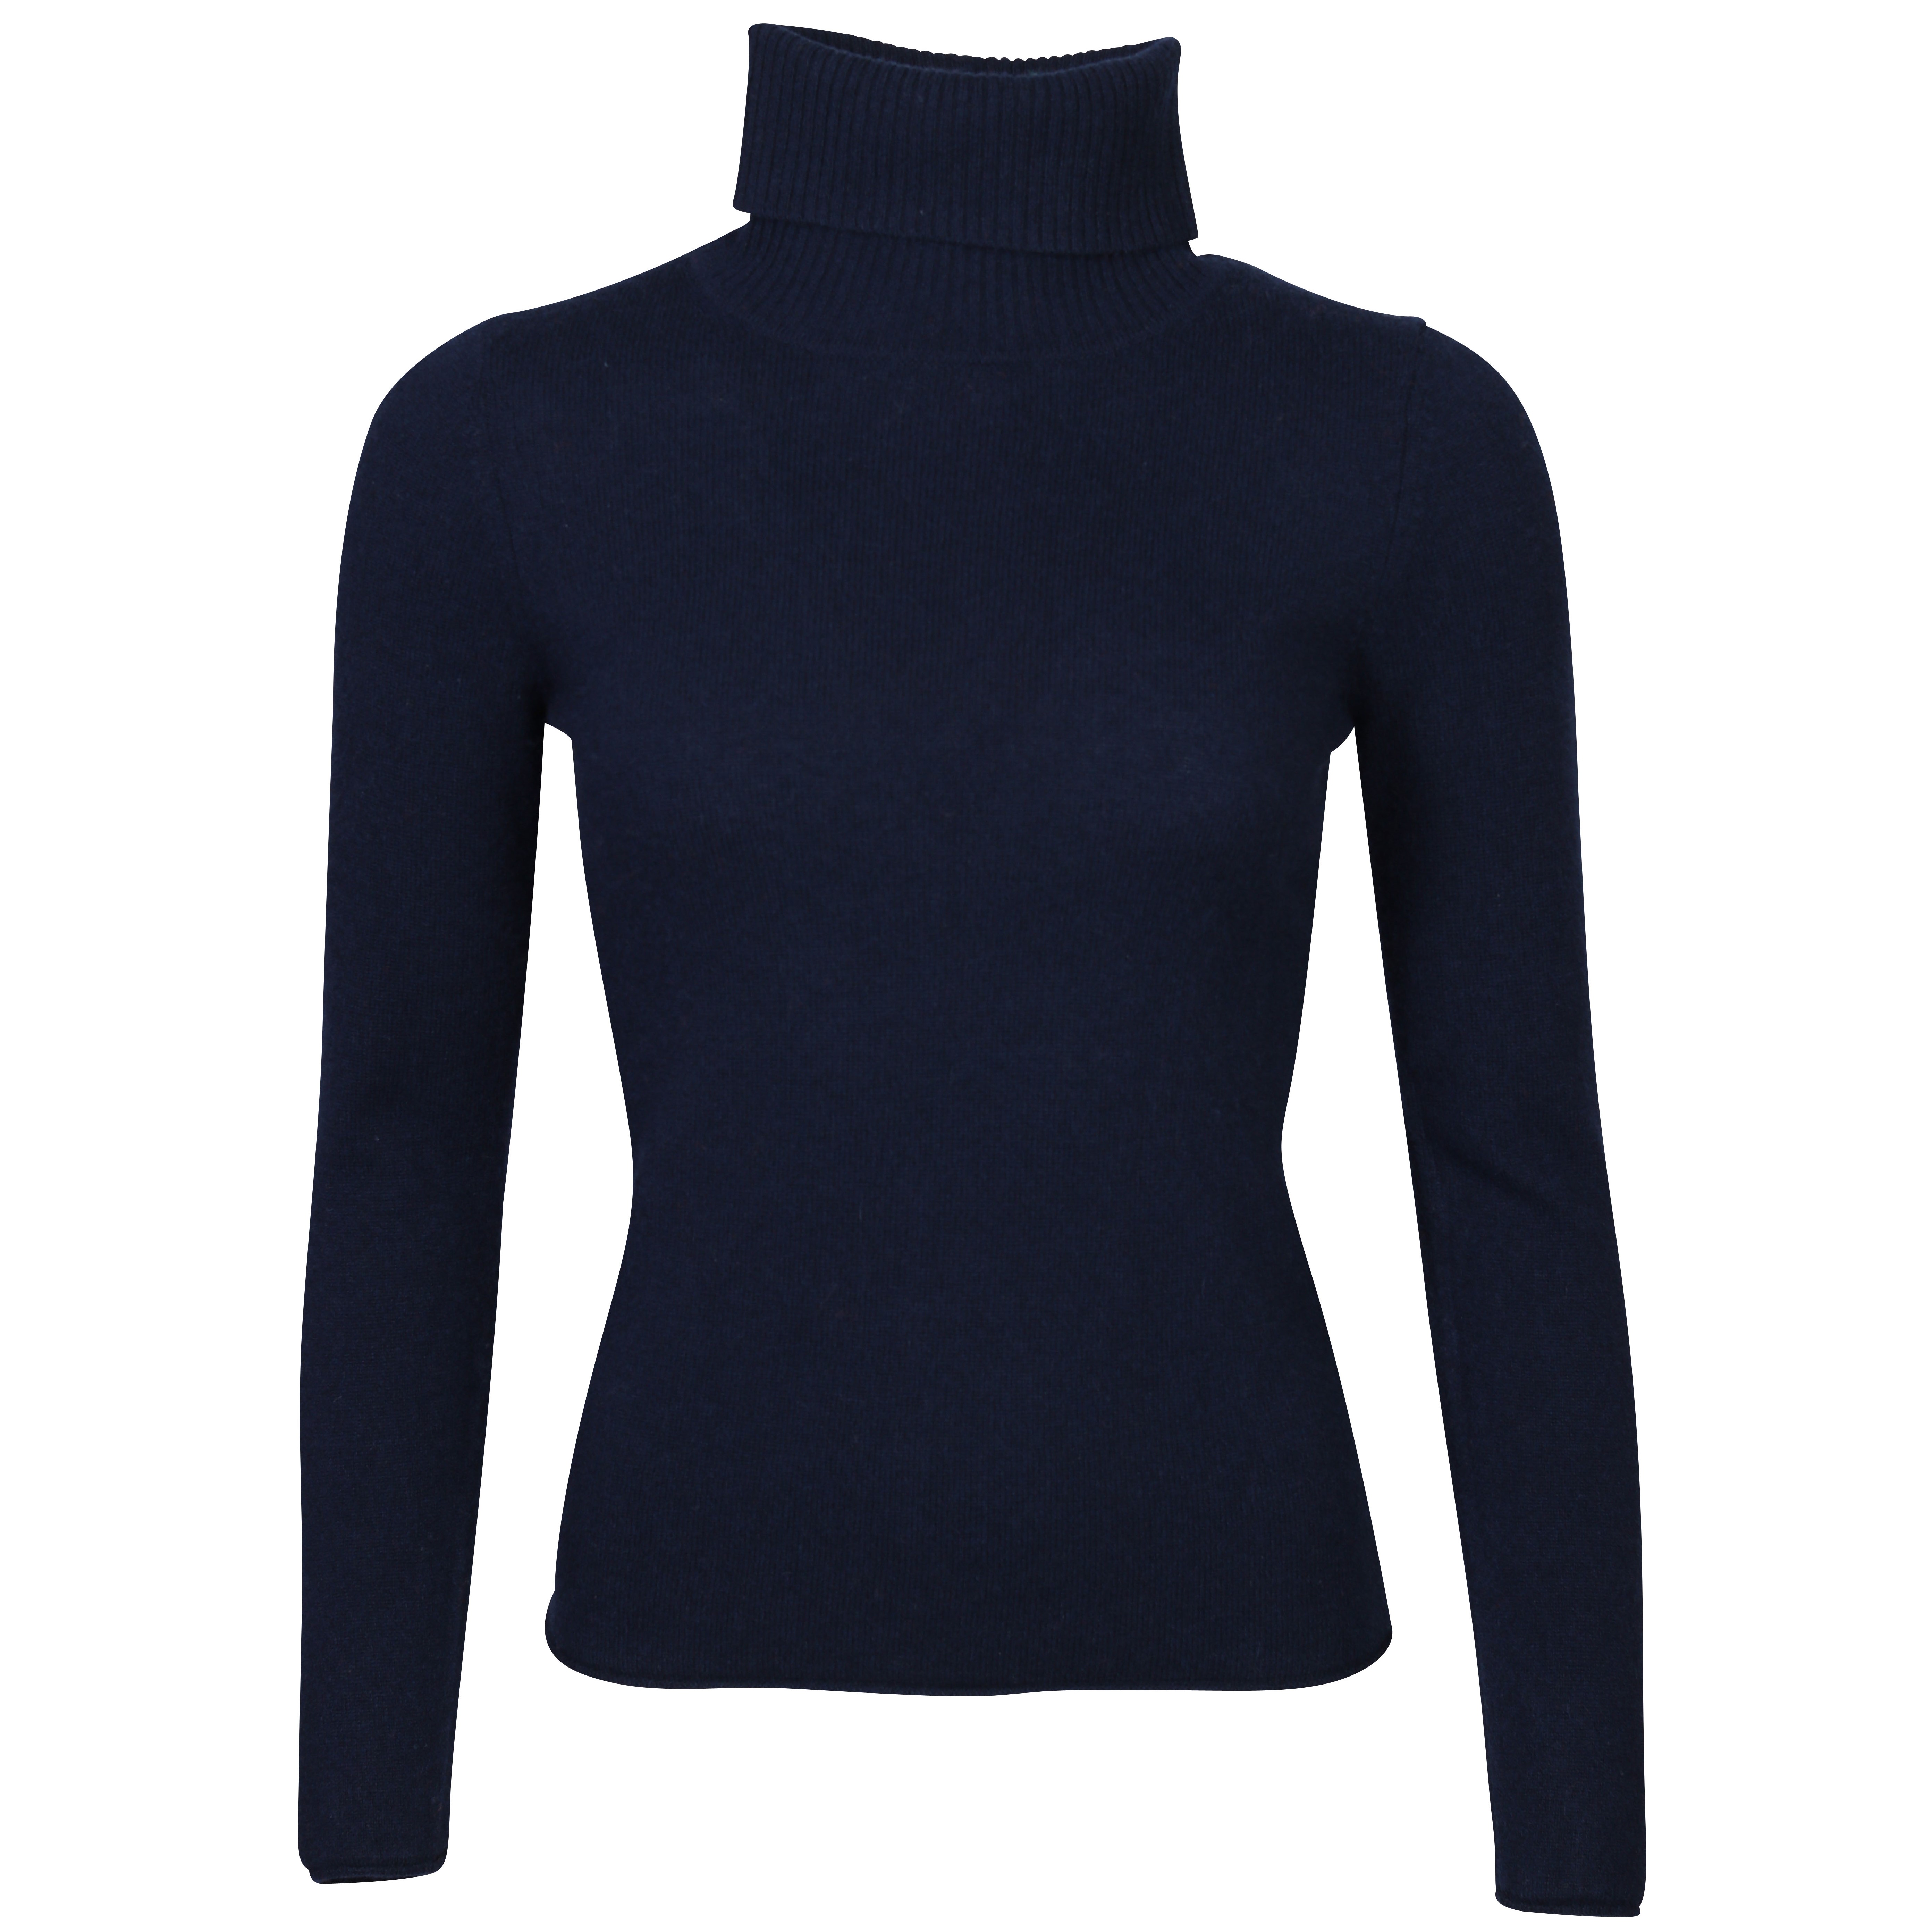 Absolut Cashmere Nina Turtle Neck in Nuit S